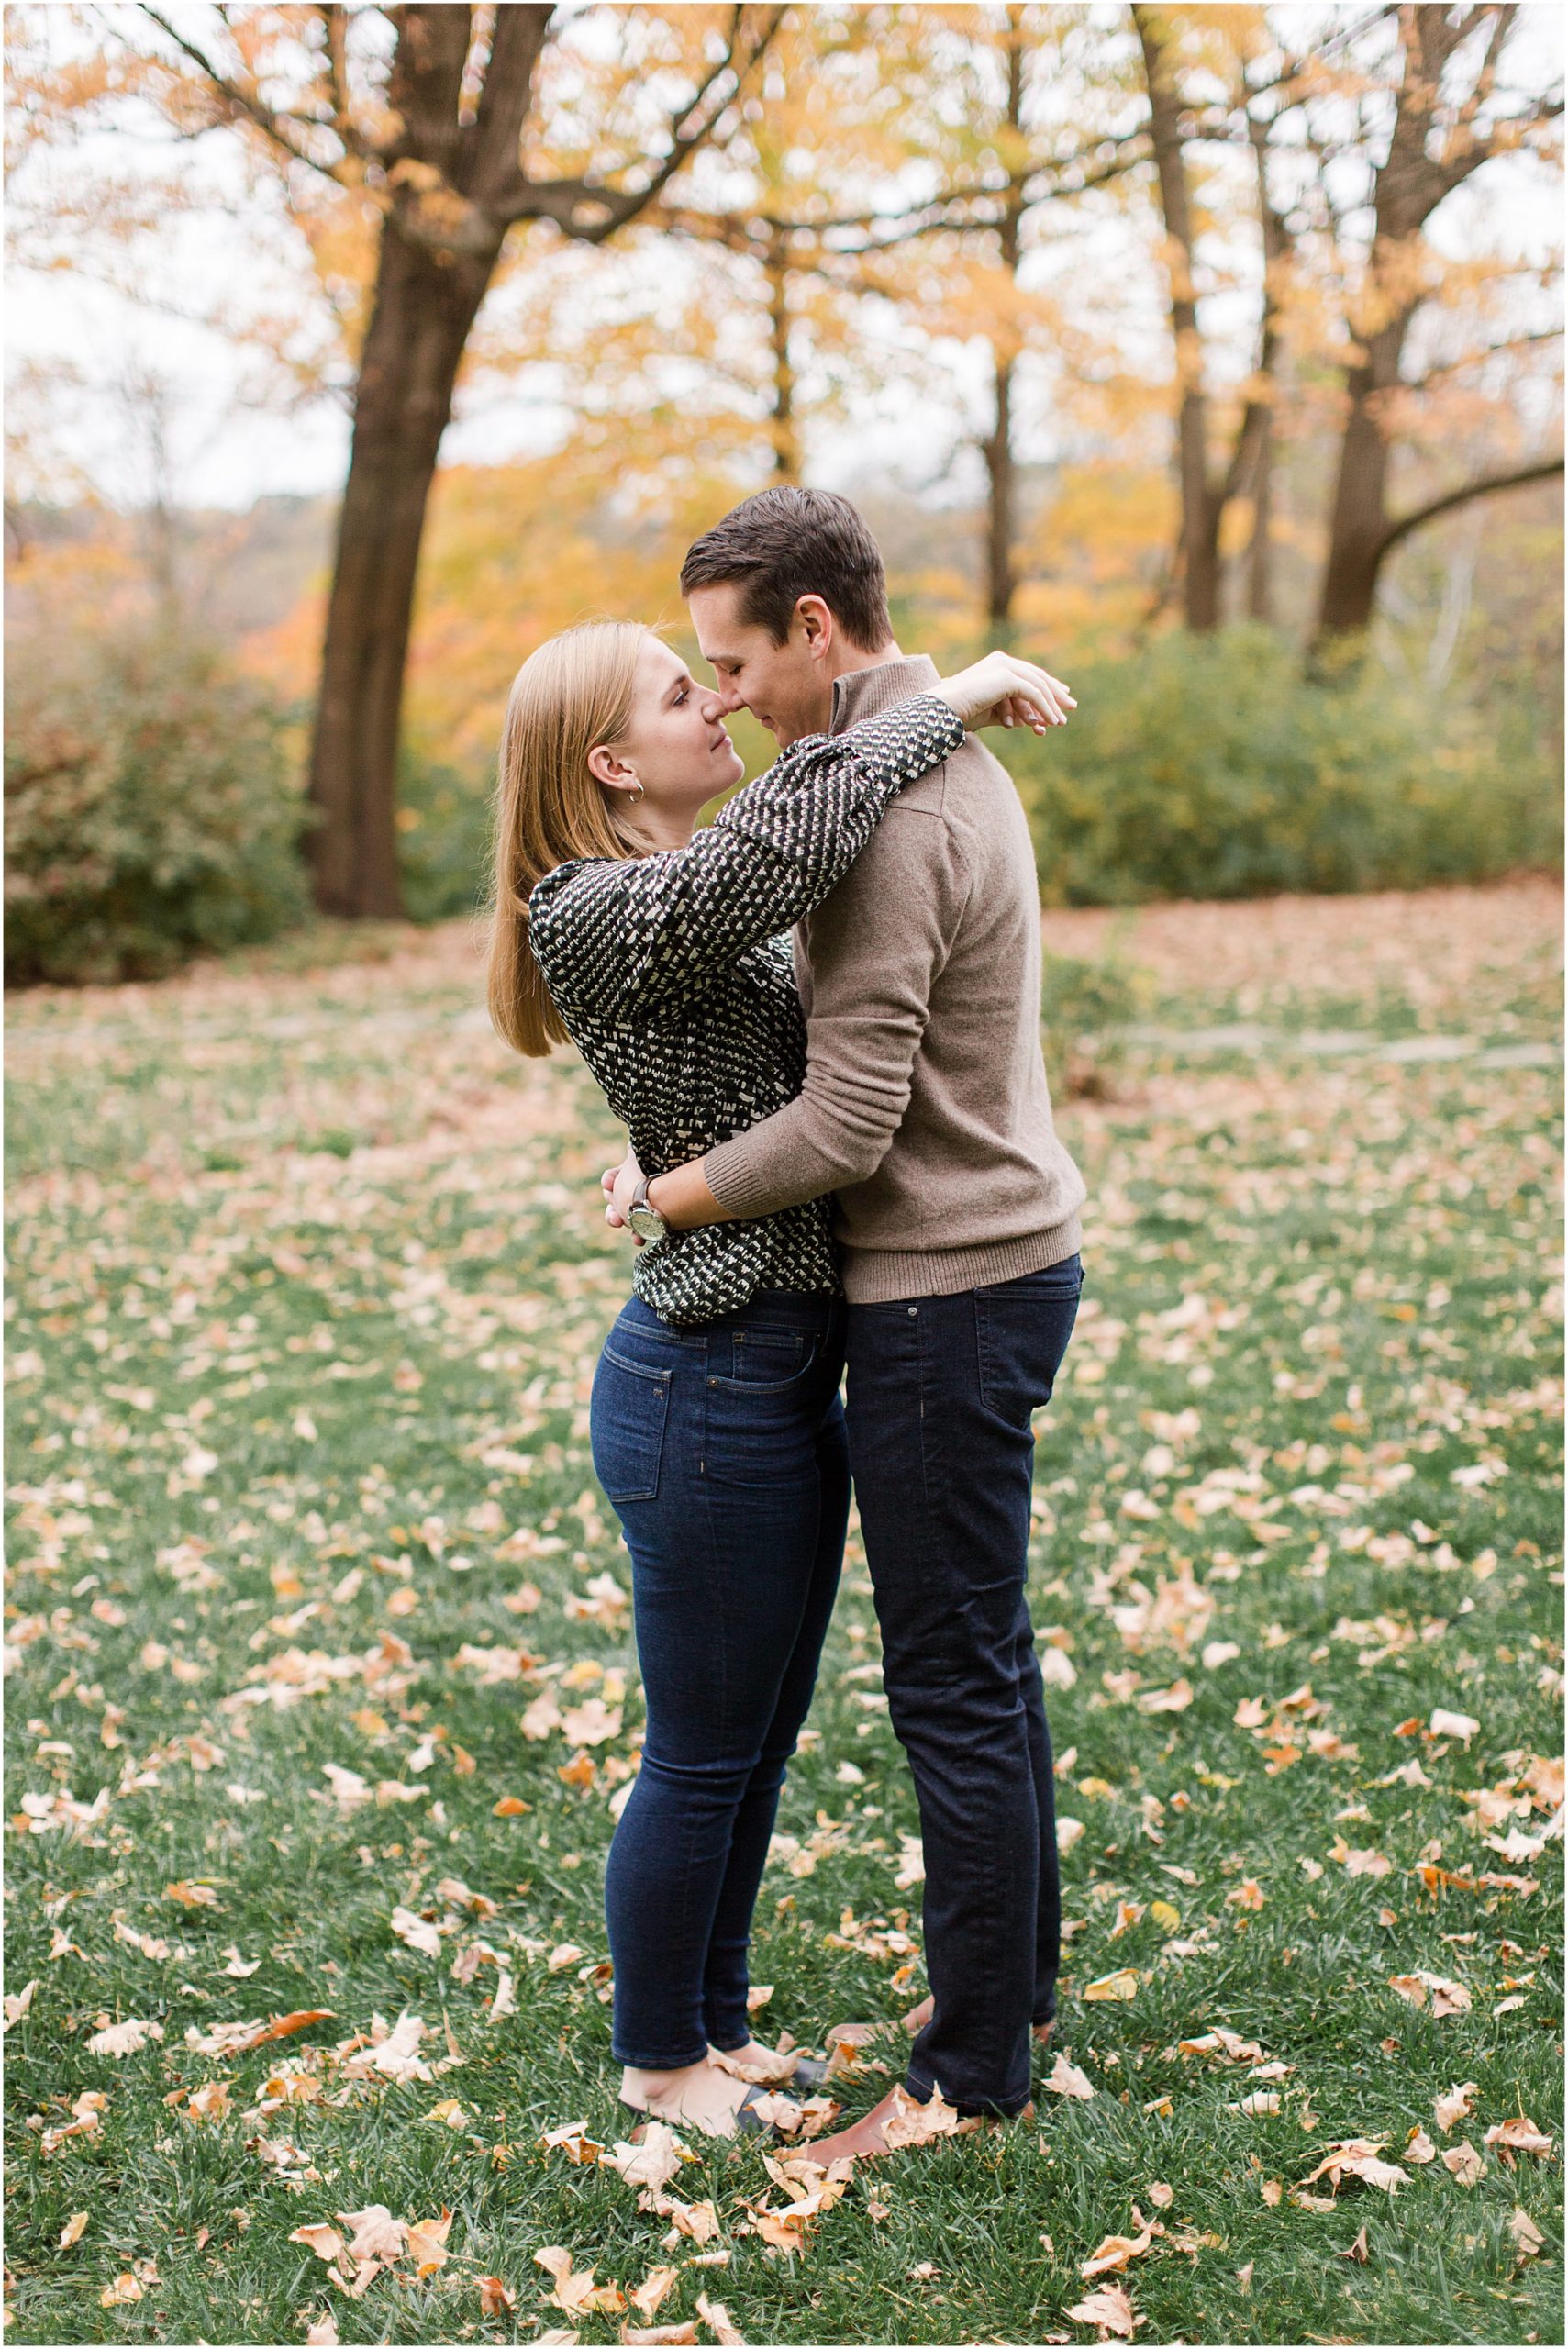 Autumn Newfields Engagement Session_0017.jpg